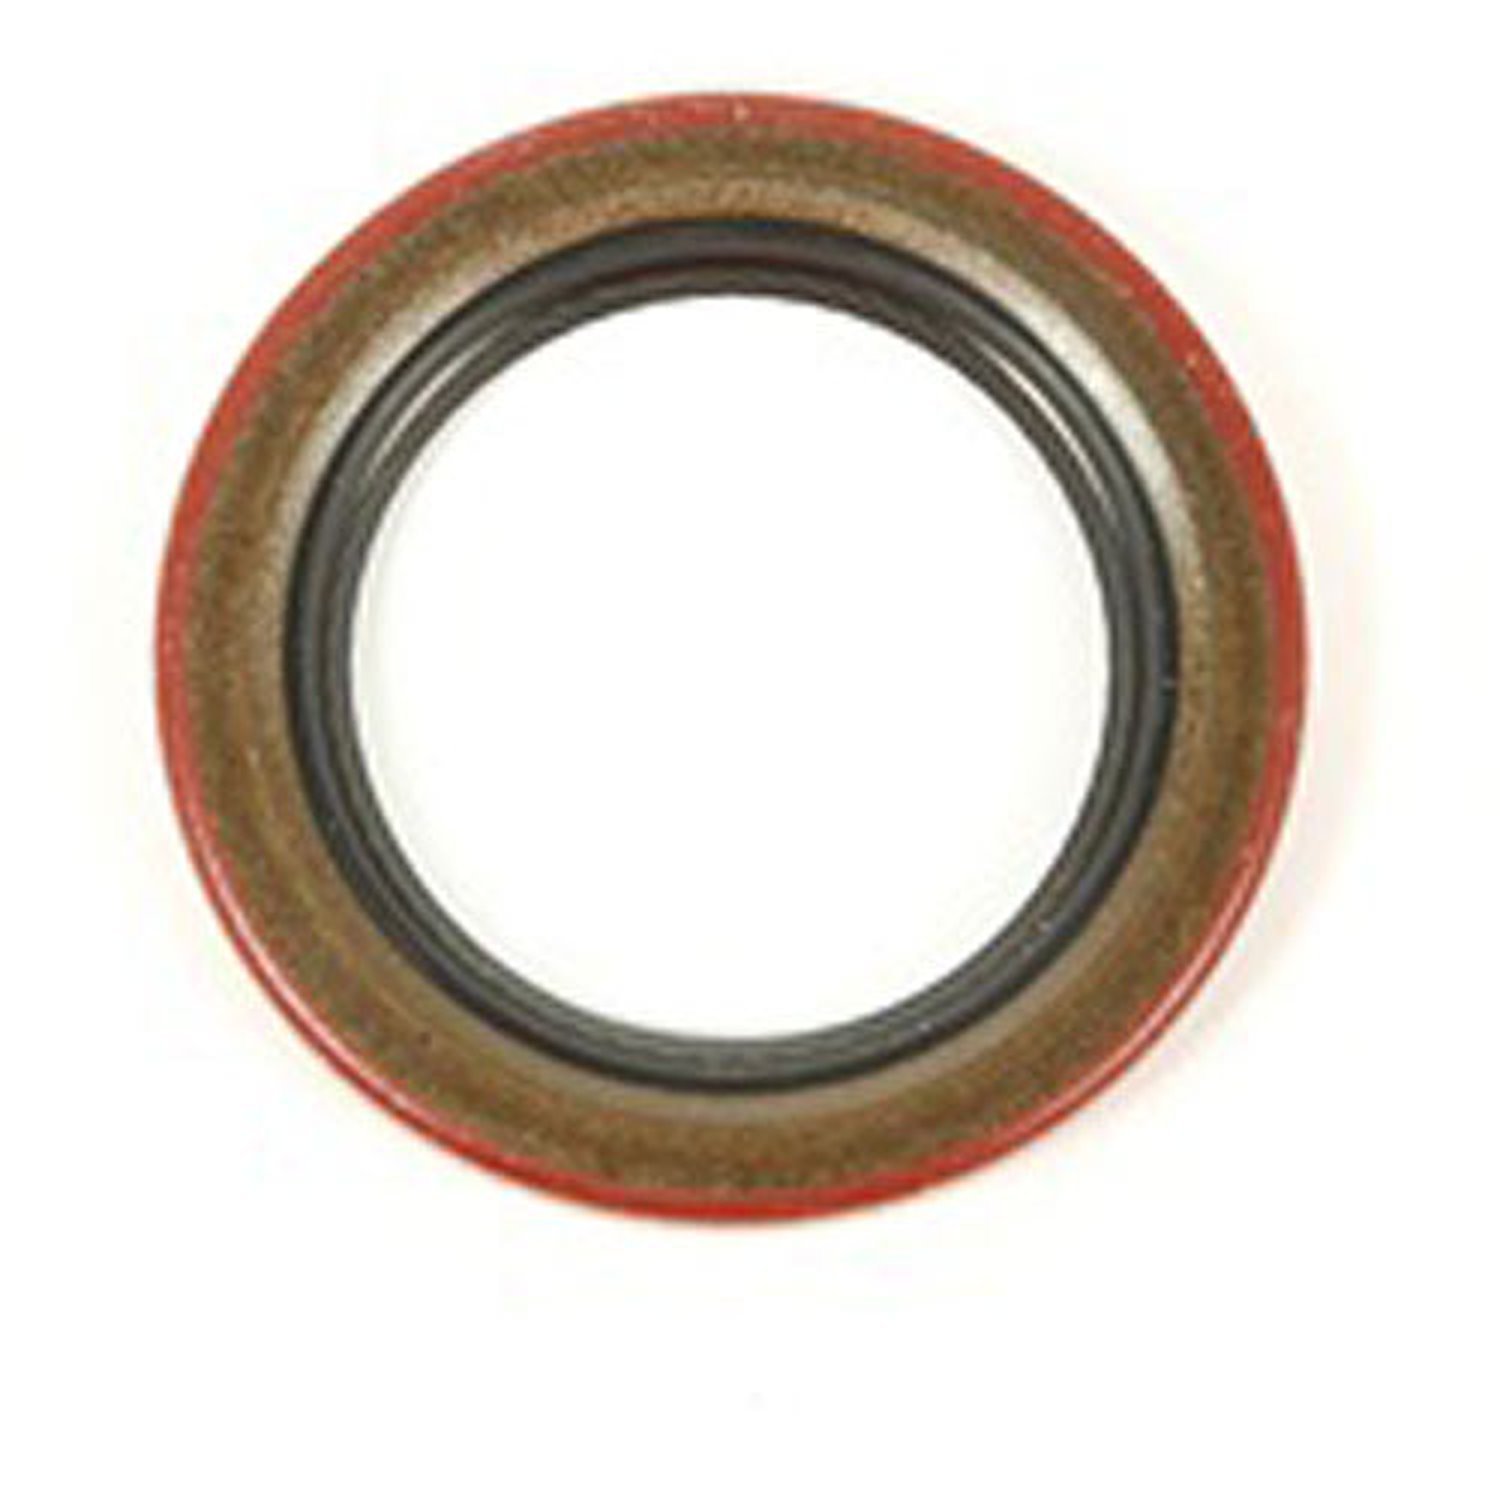 This oil seal fits the transmission input shaft